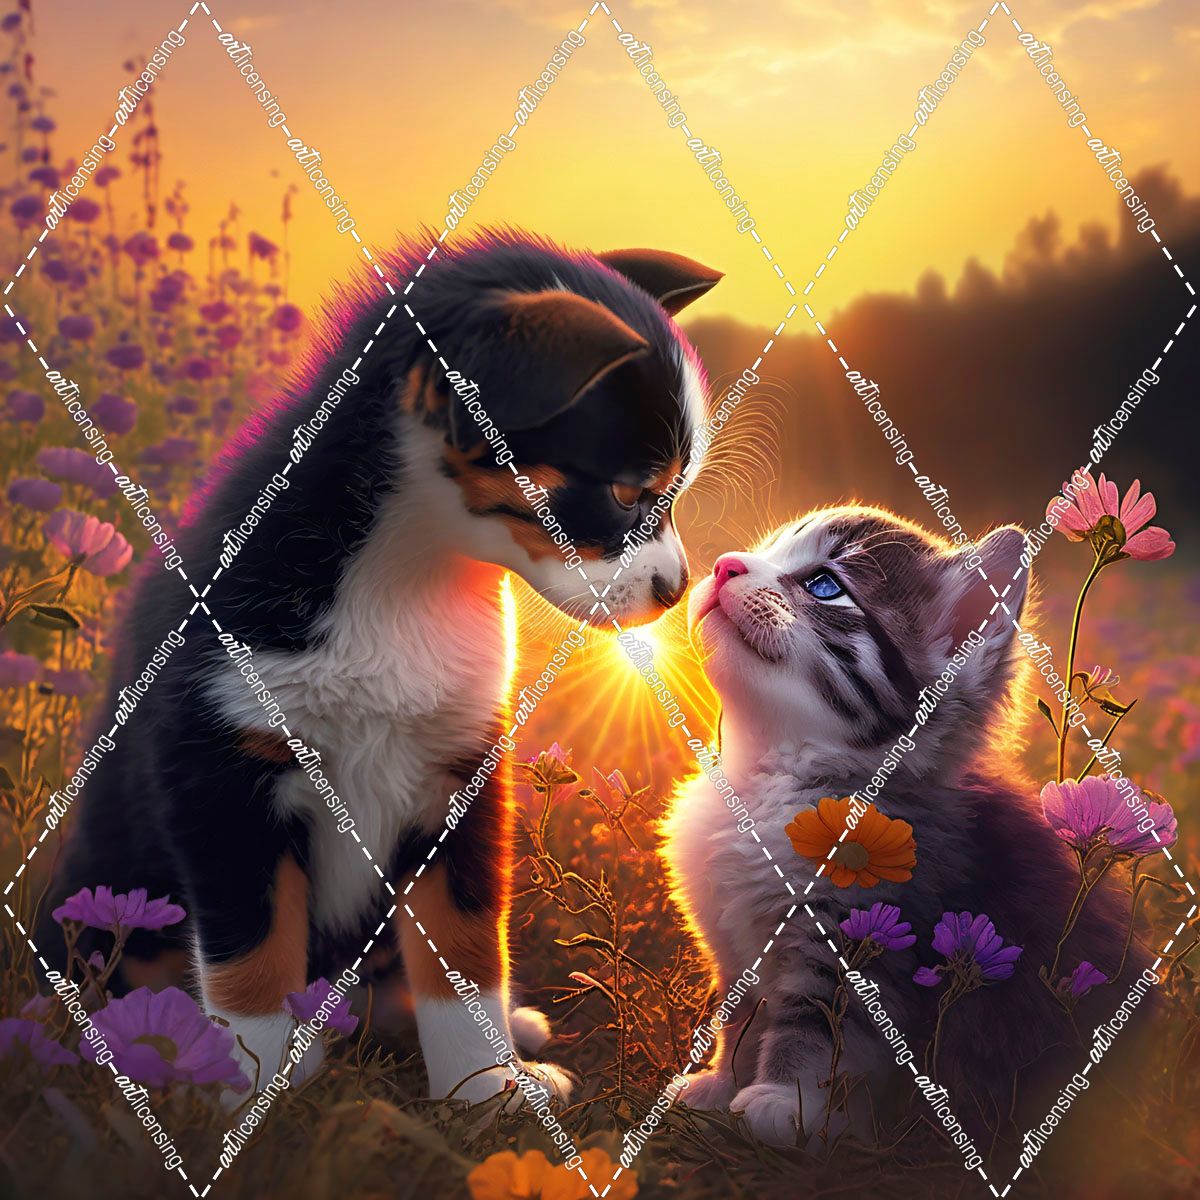 Cats And Dogs 28